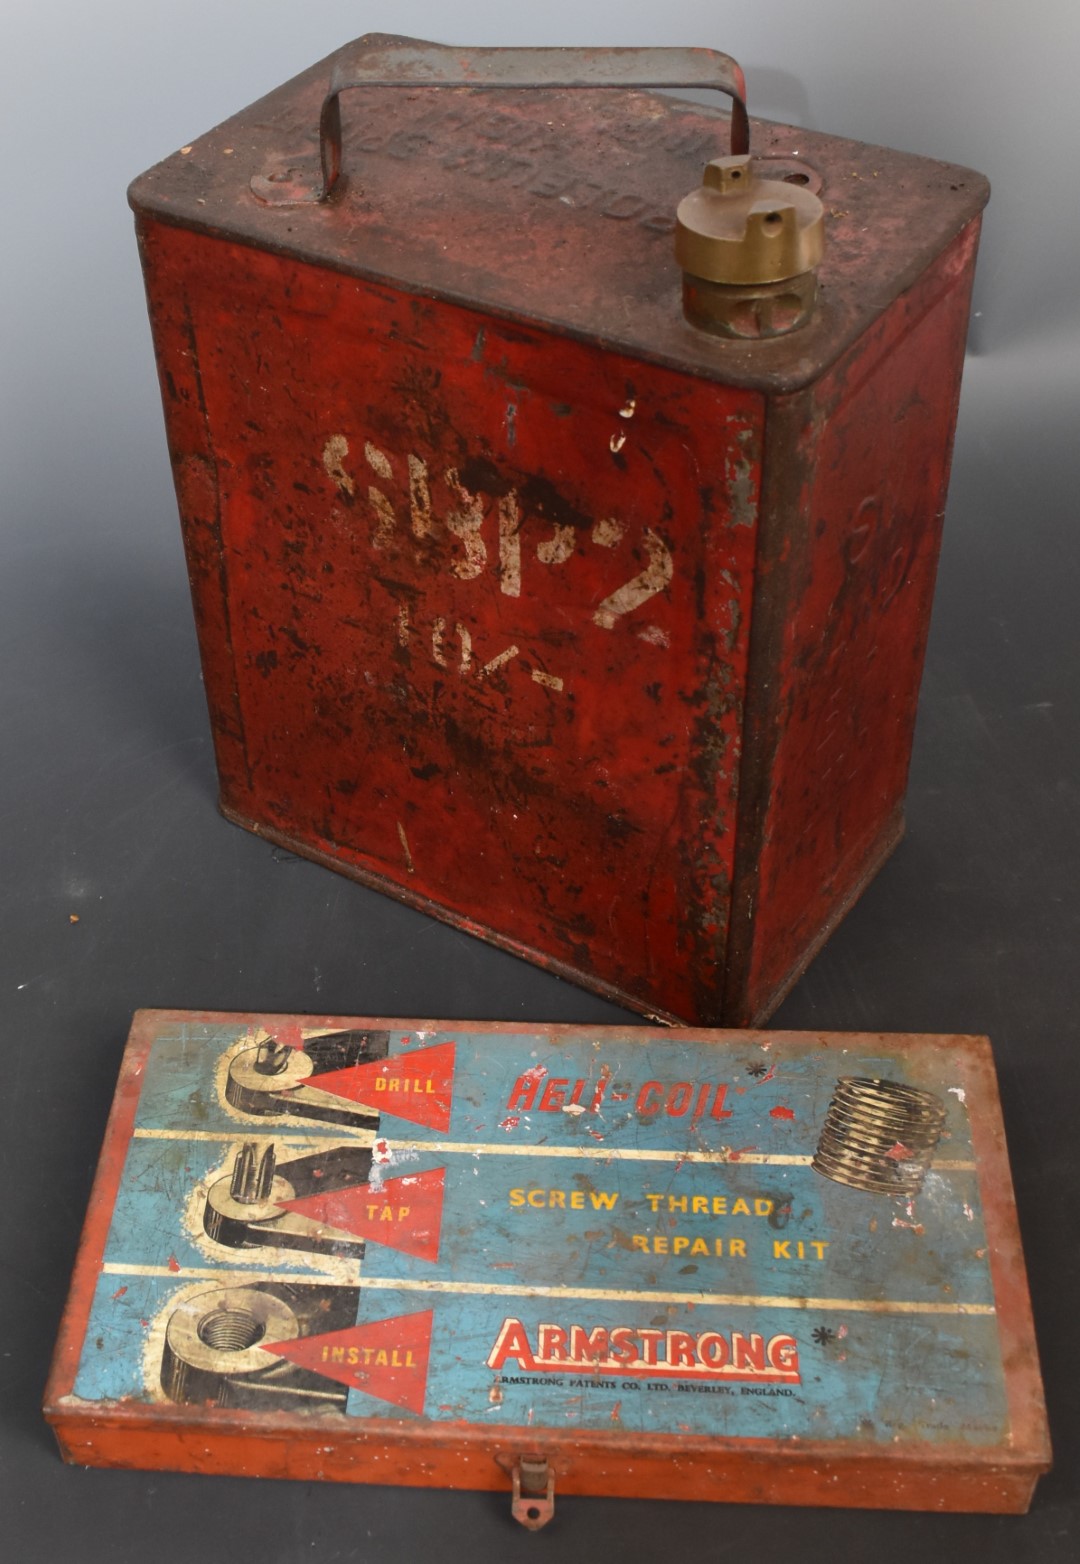 Shell Mex and BP Ltd vintage 2 gallon petrol can, together with a vintage Armstrong BSF Heli-coil